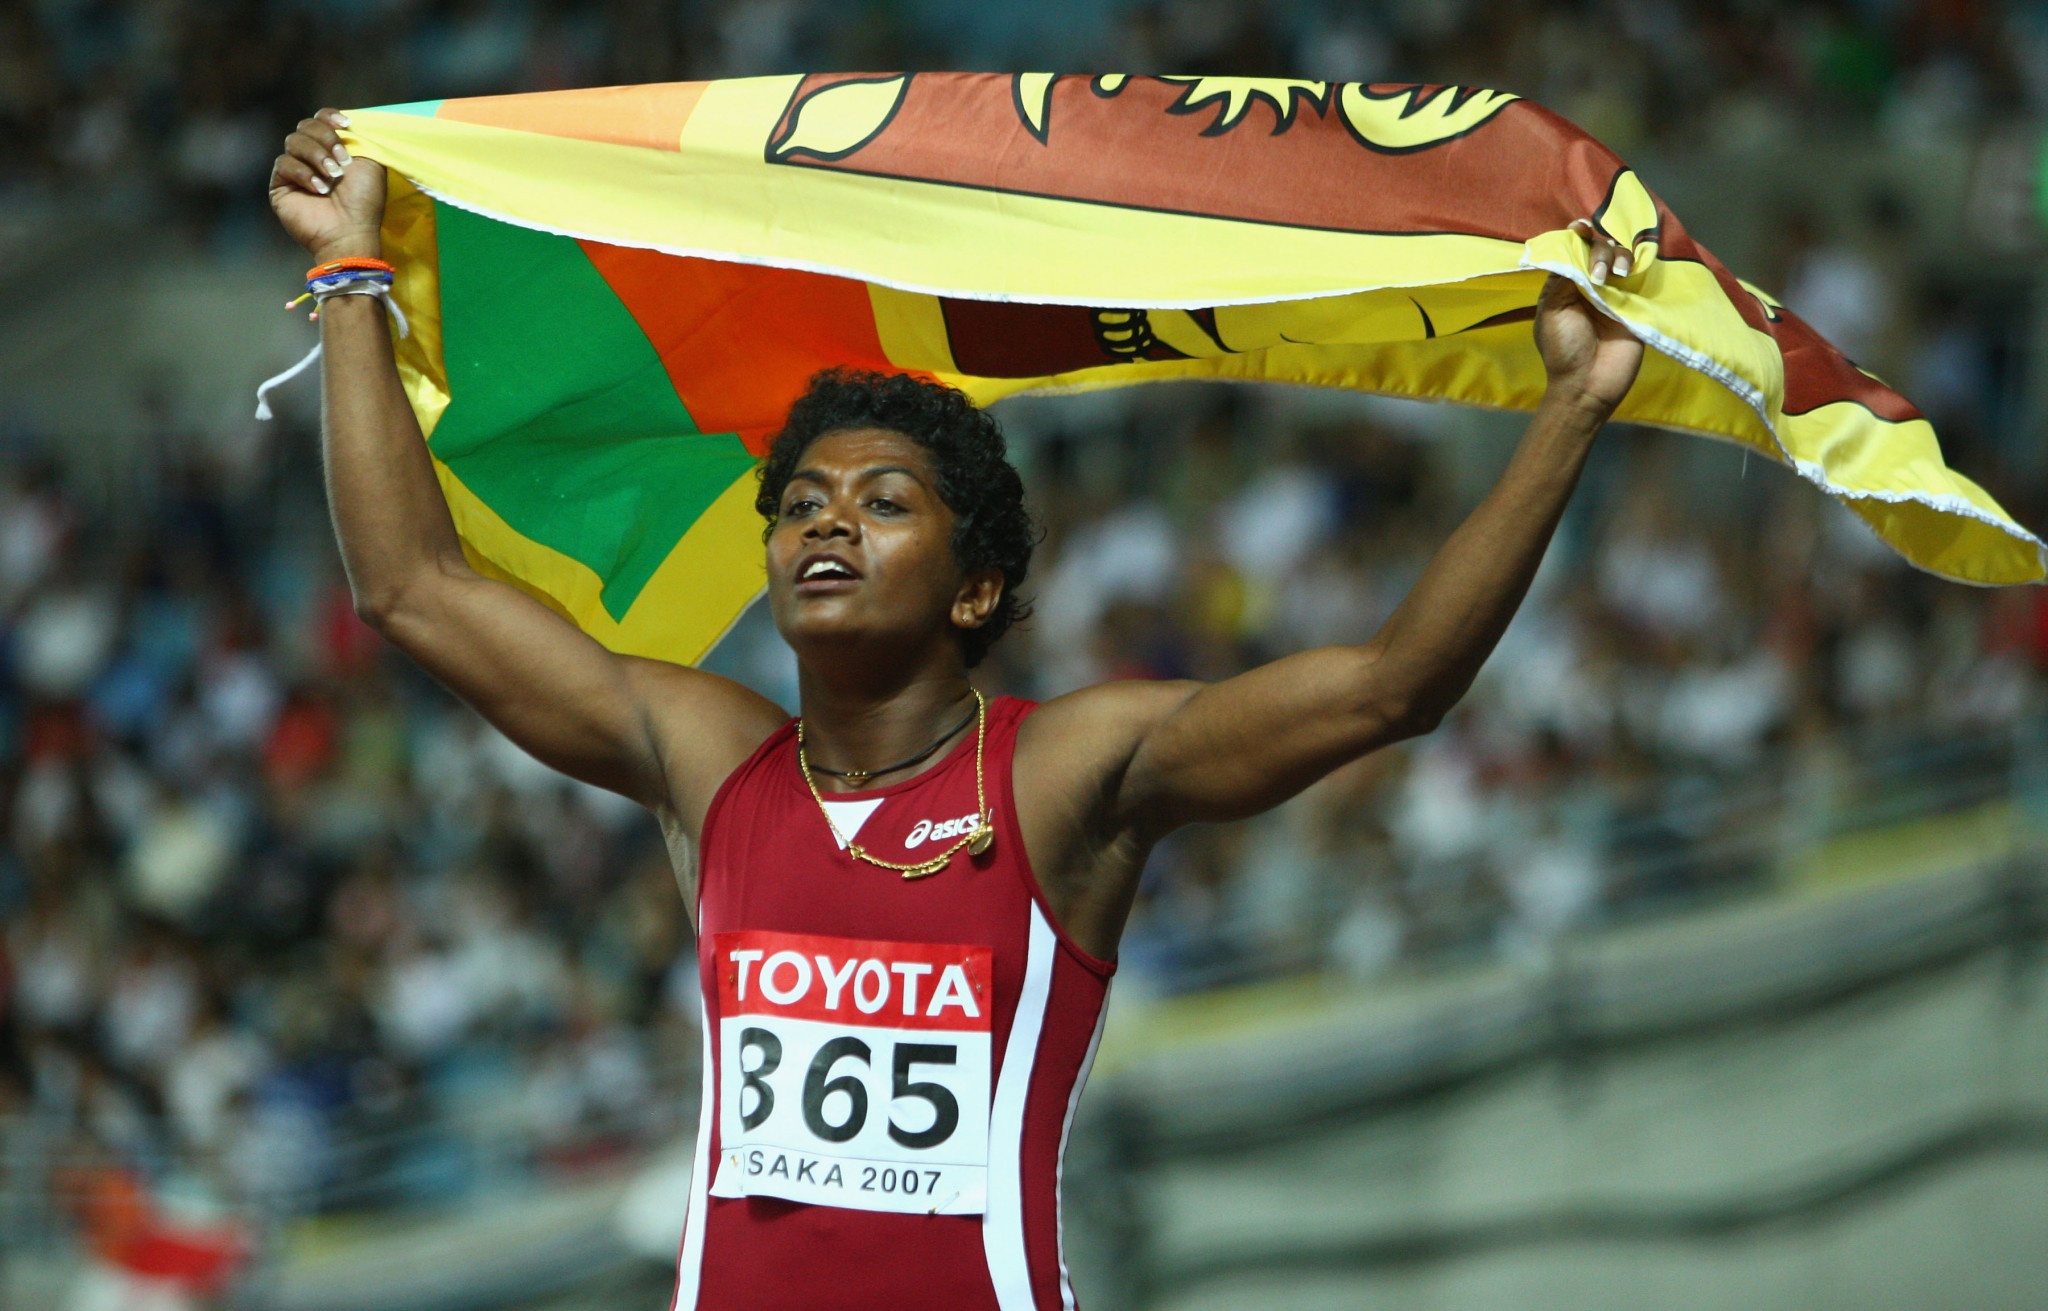 Sri Lanka has not won an athletics medal at the Asian Games since Doha 2006, where Susanthika Jayasinghe won silver and bronze in the 100m and 200m respectively ©Getty Images